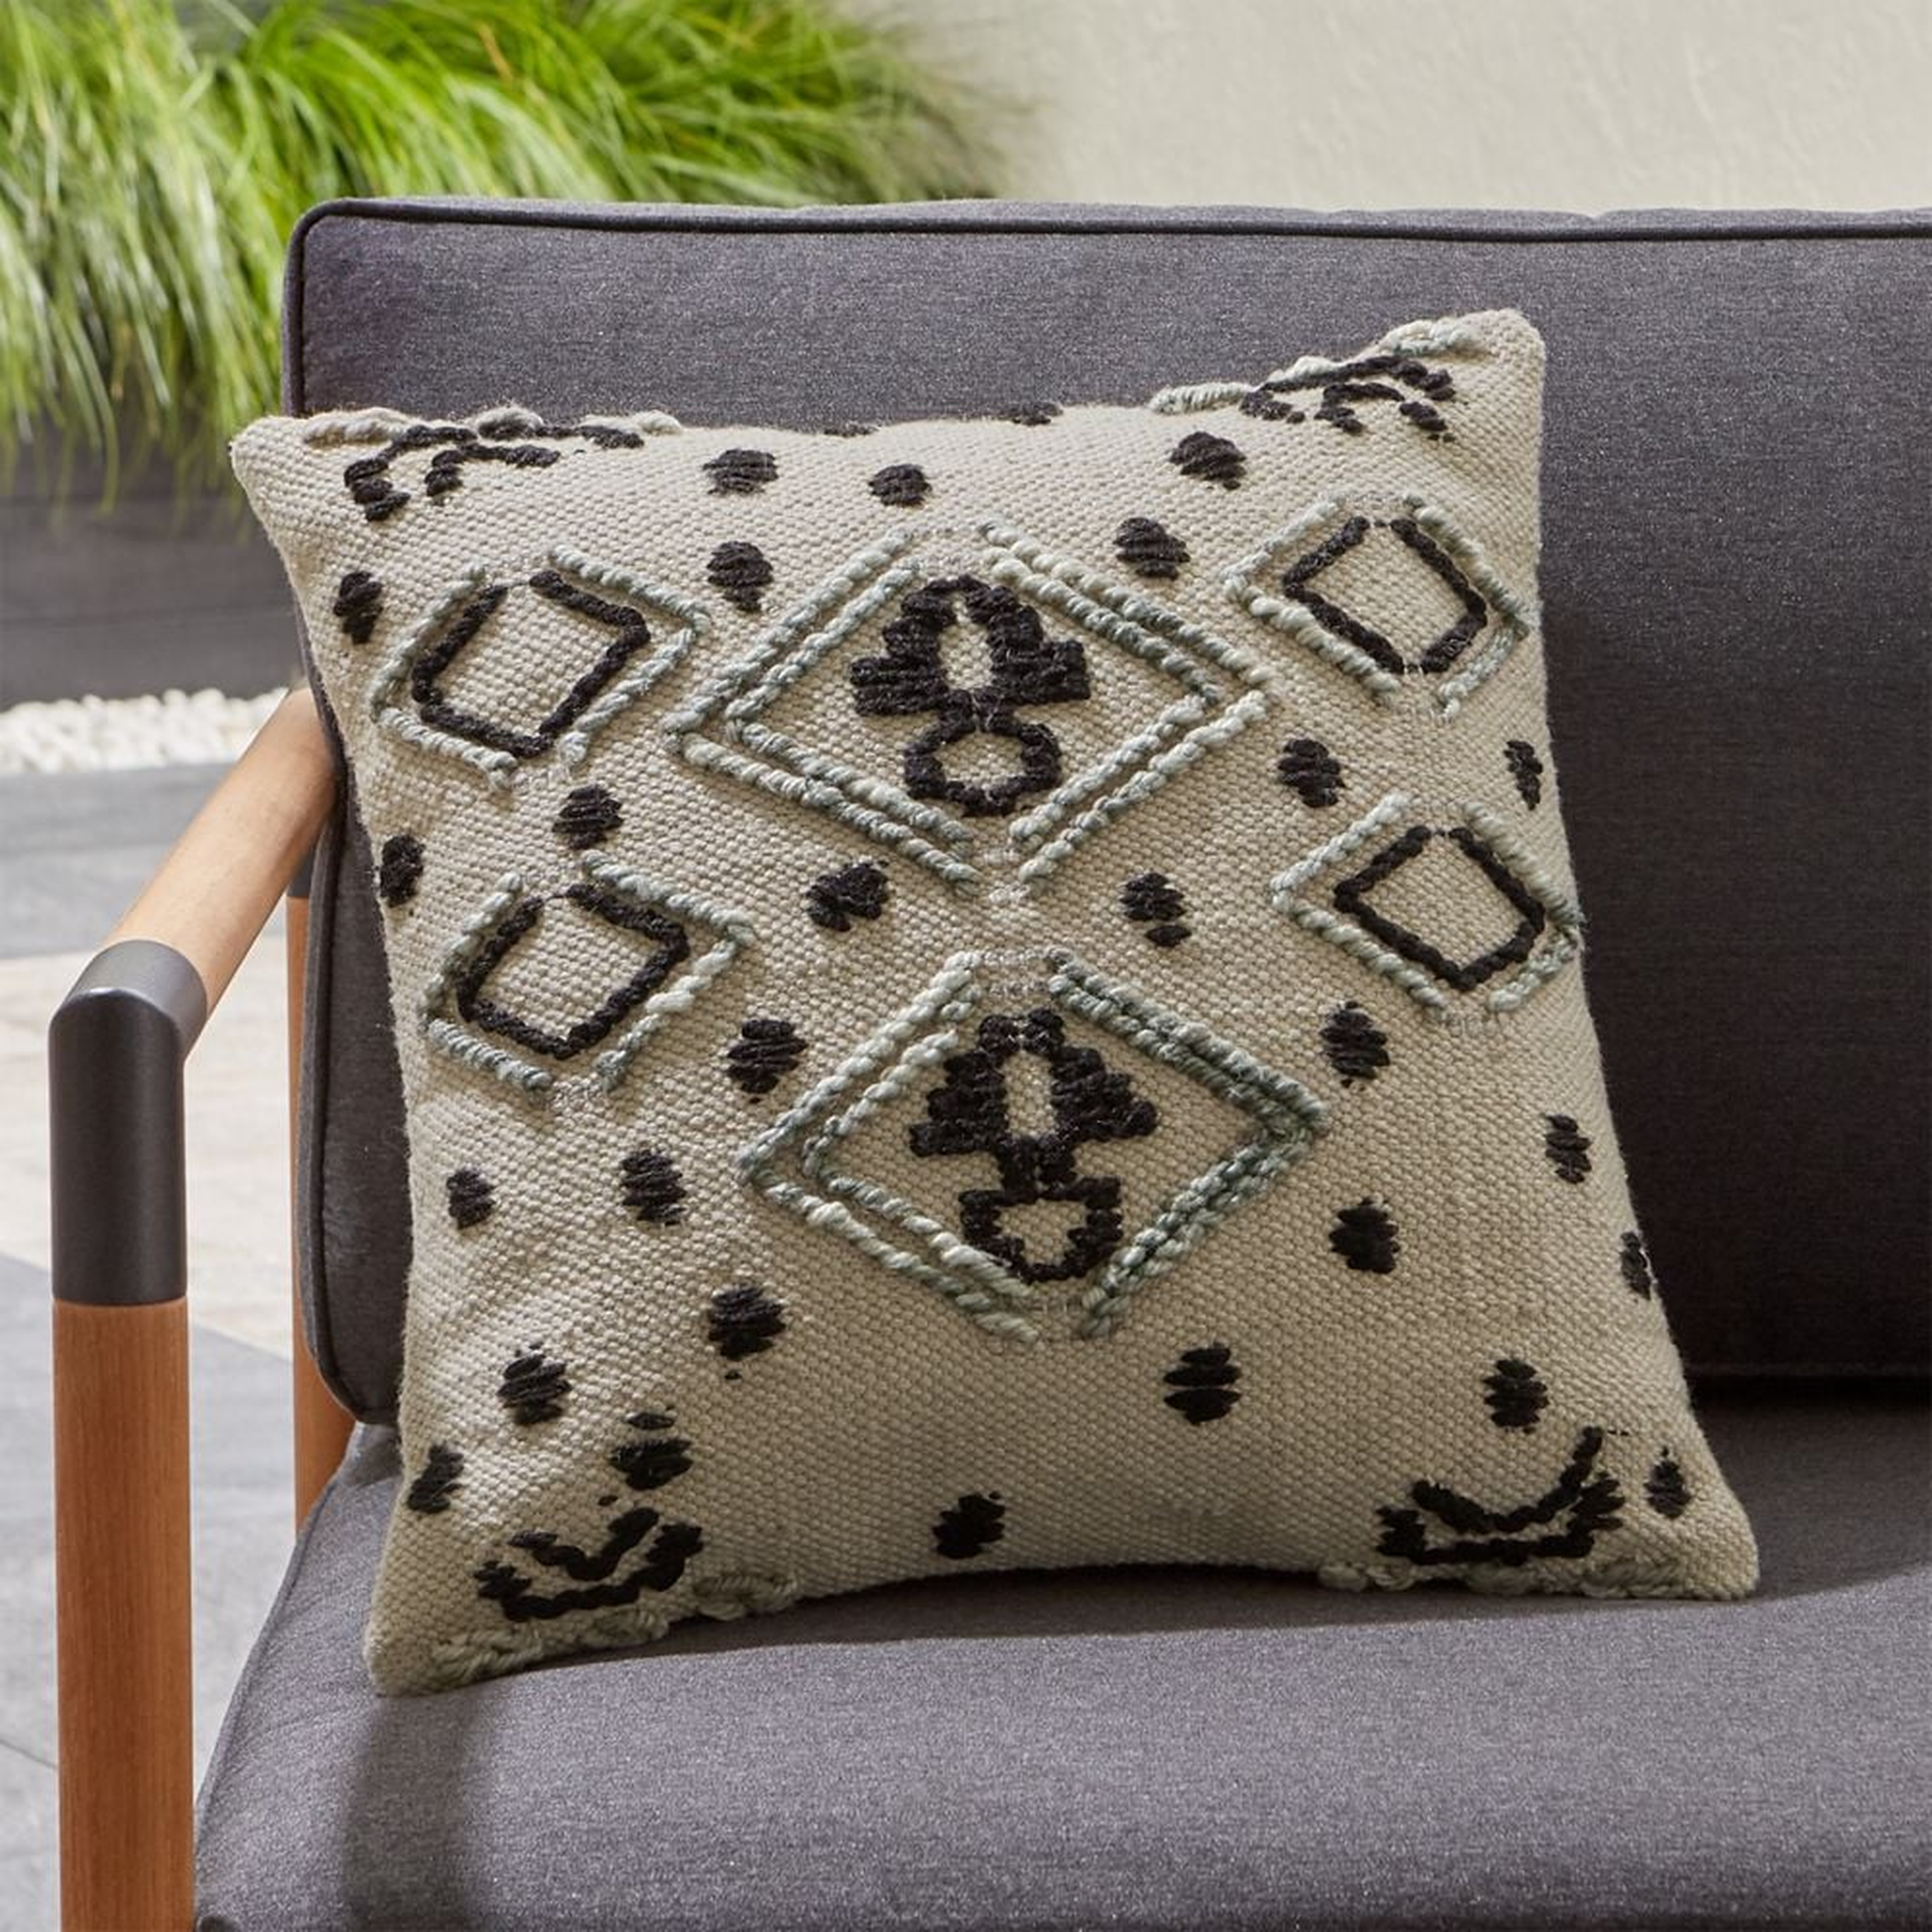 Mohave Embroidered Outdoor Pillow - Crate and Barrel